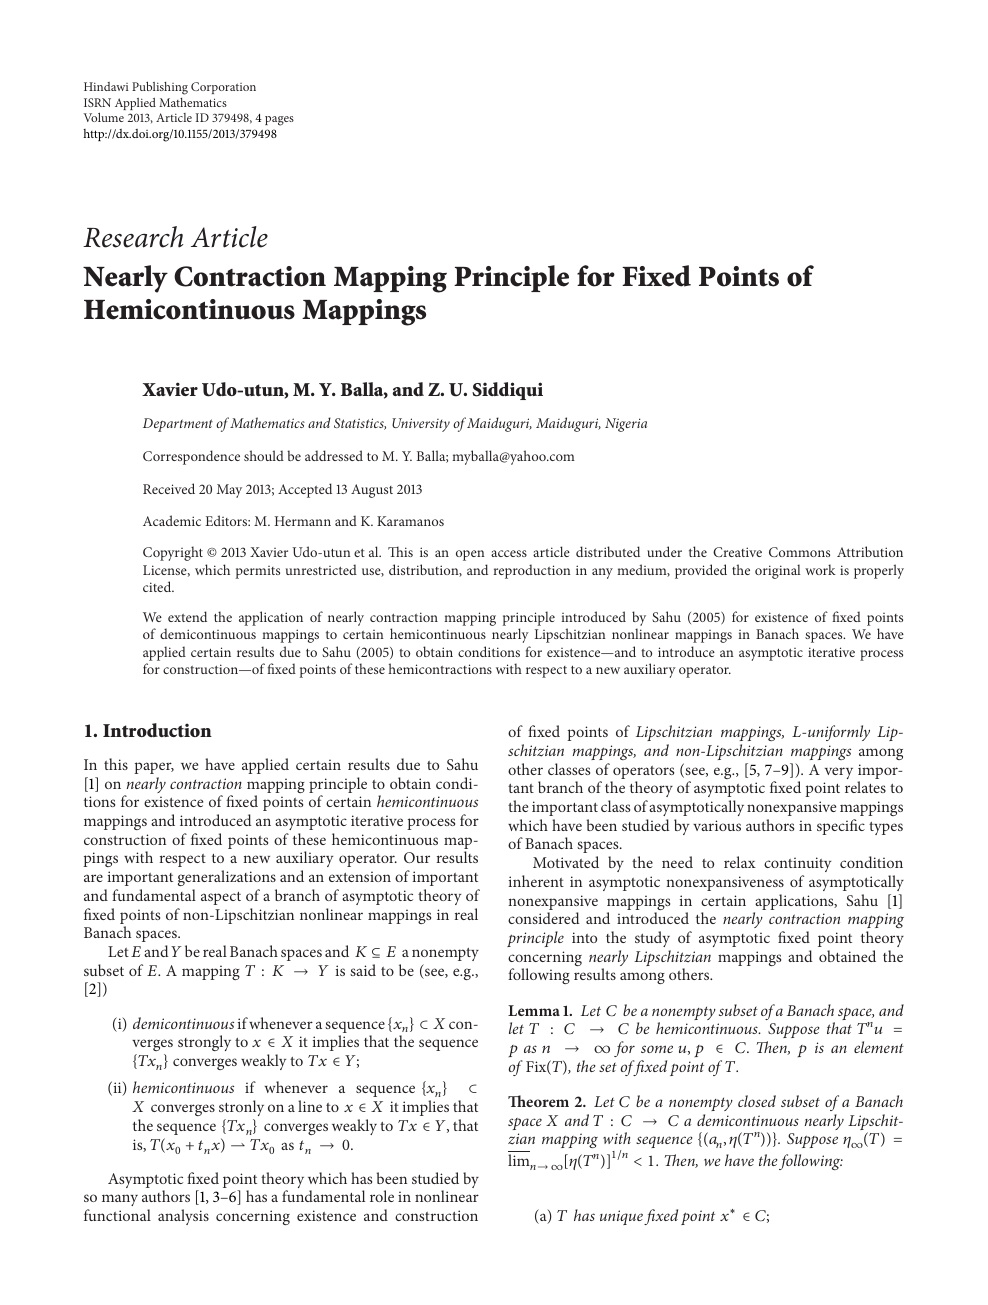 Nearly Contraction Mapping Principle For Fixed Points Of Hemicontinuous Mappings Topic Of Research Paper In Mathematics Download Scholarly Article Pdf And Read For Free On Cyberleninka Open Science Hub